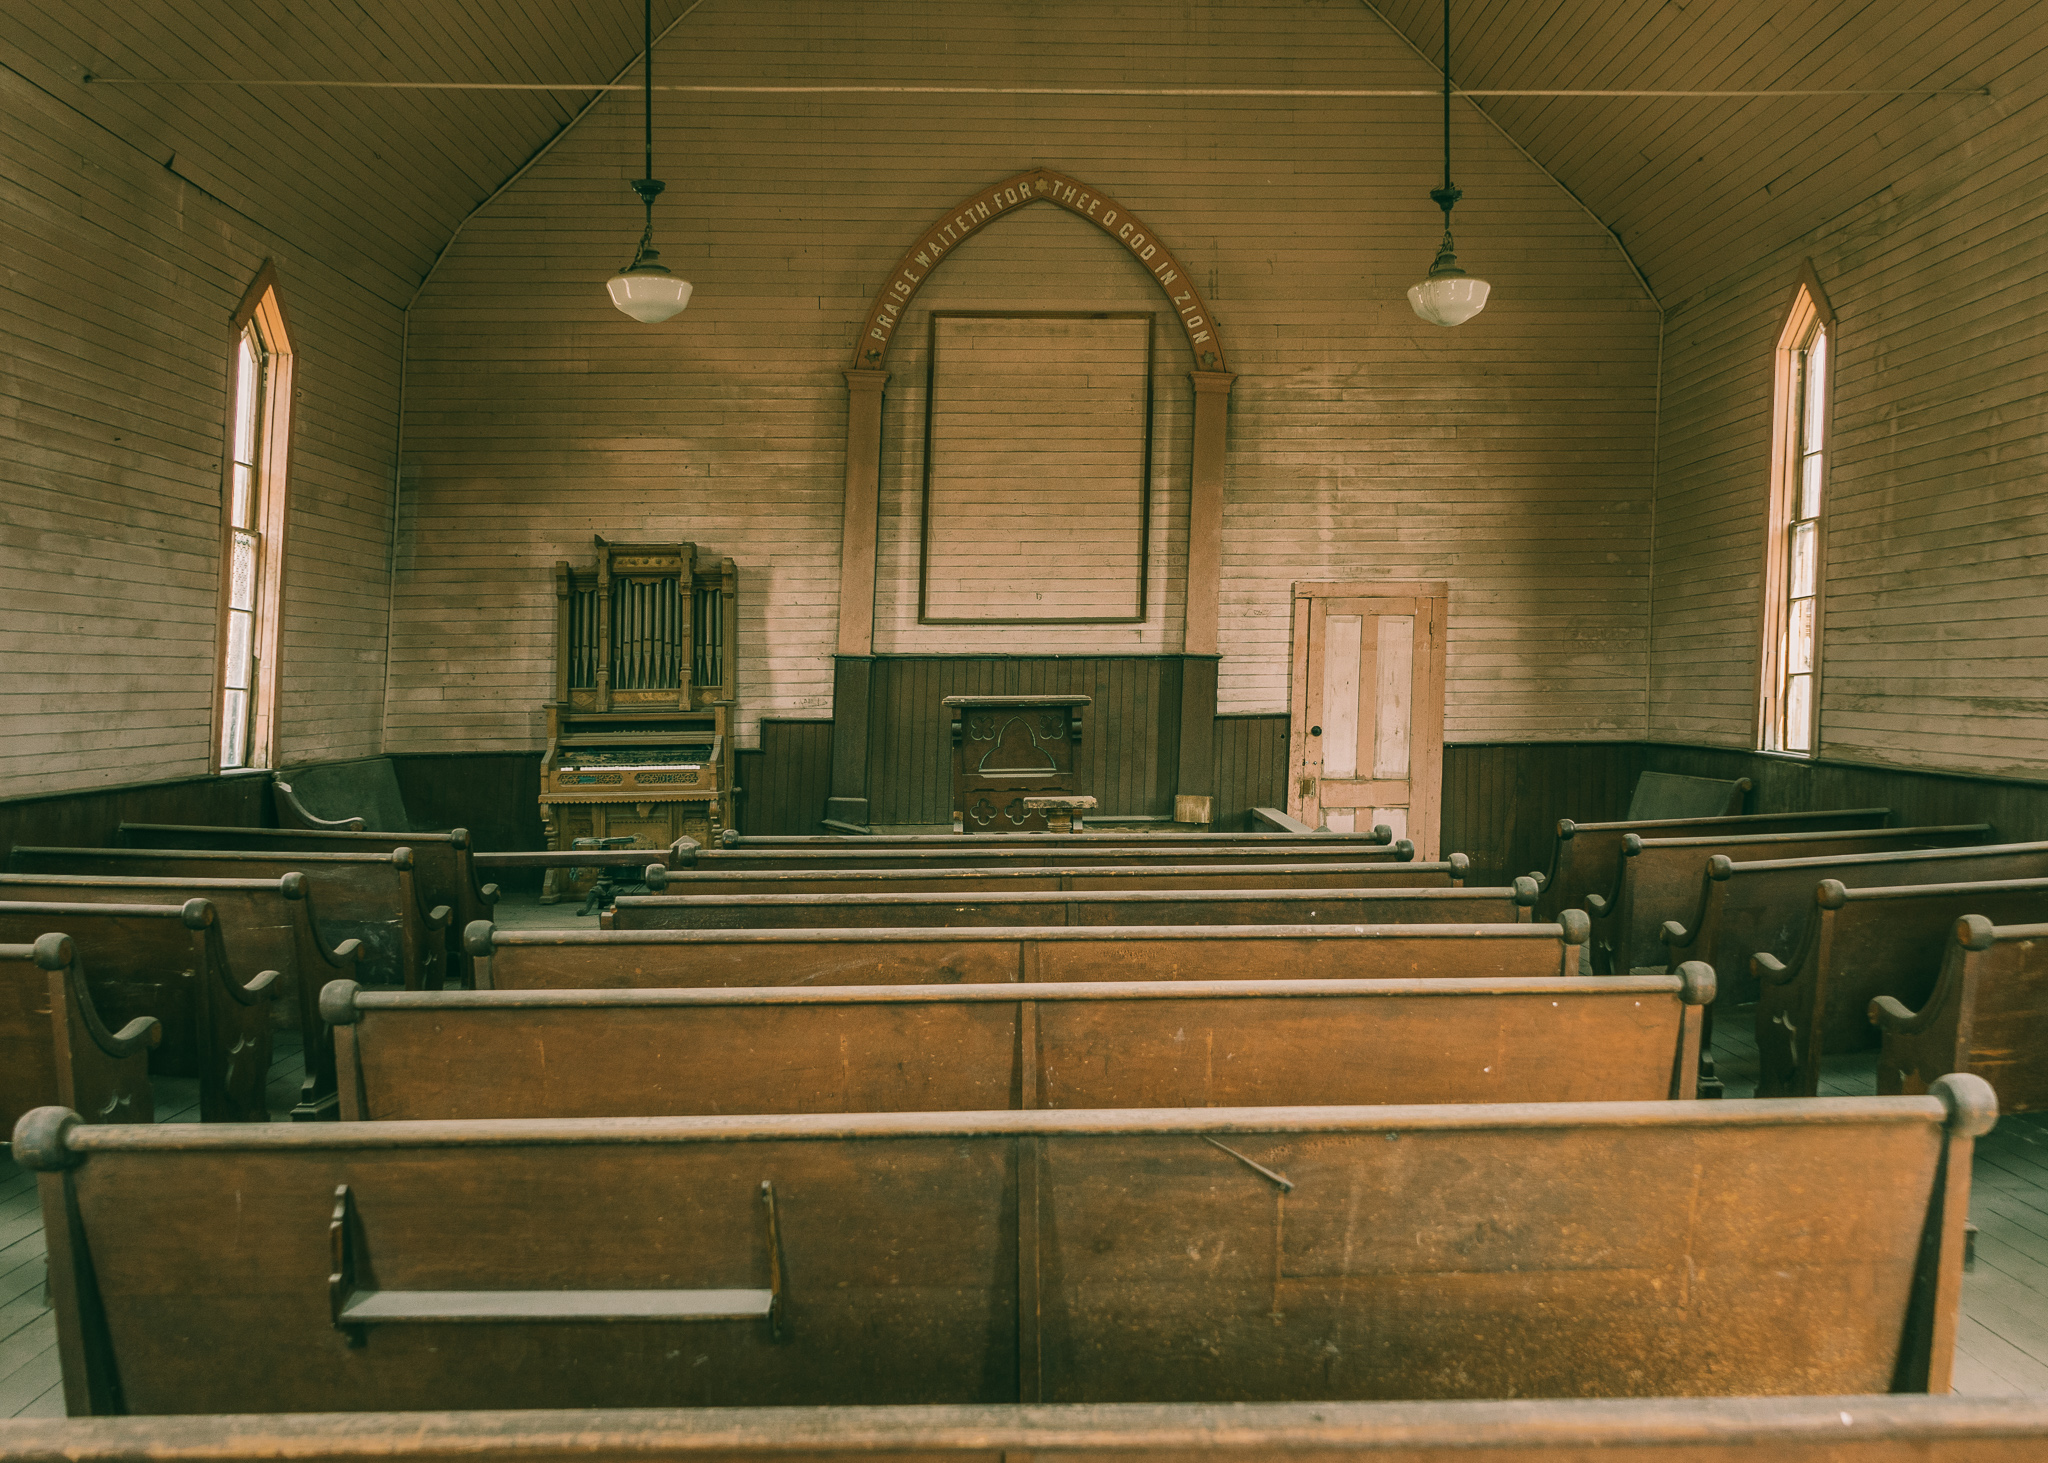 view inside the church of Bodie